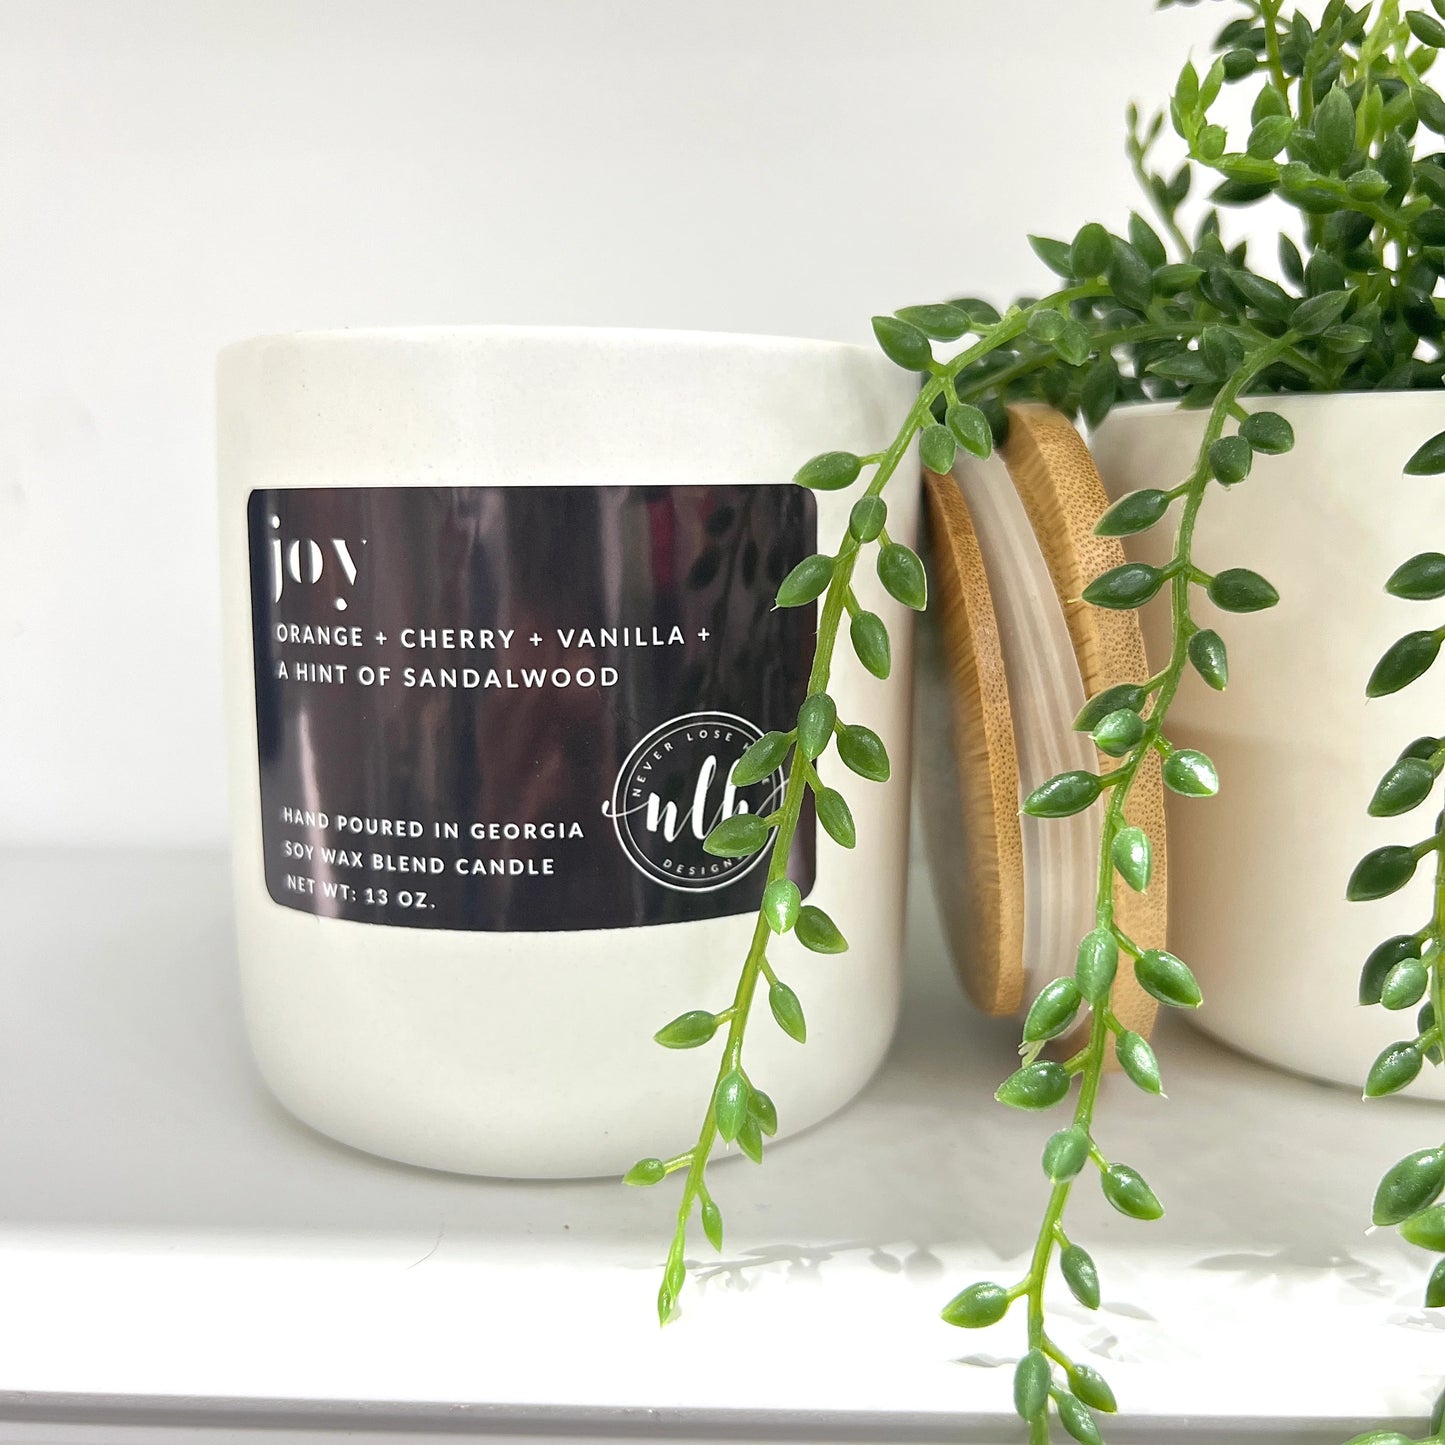 Never Lose Hope® Soy Wax Blend Candle- "Joy"